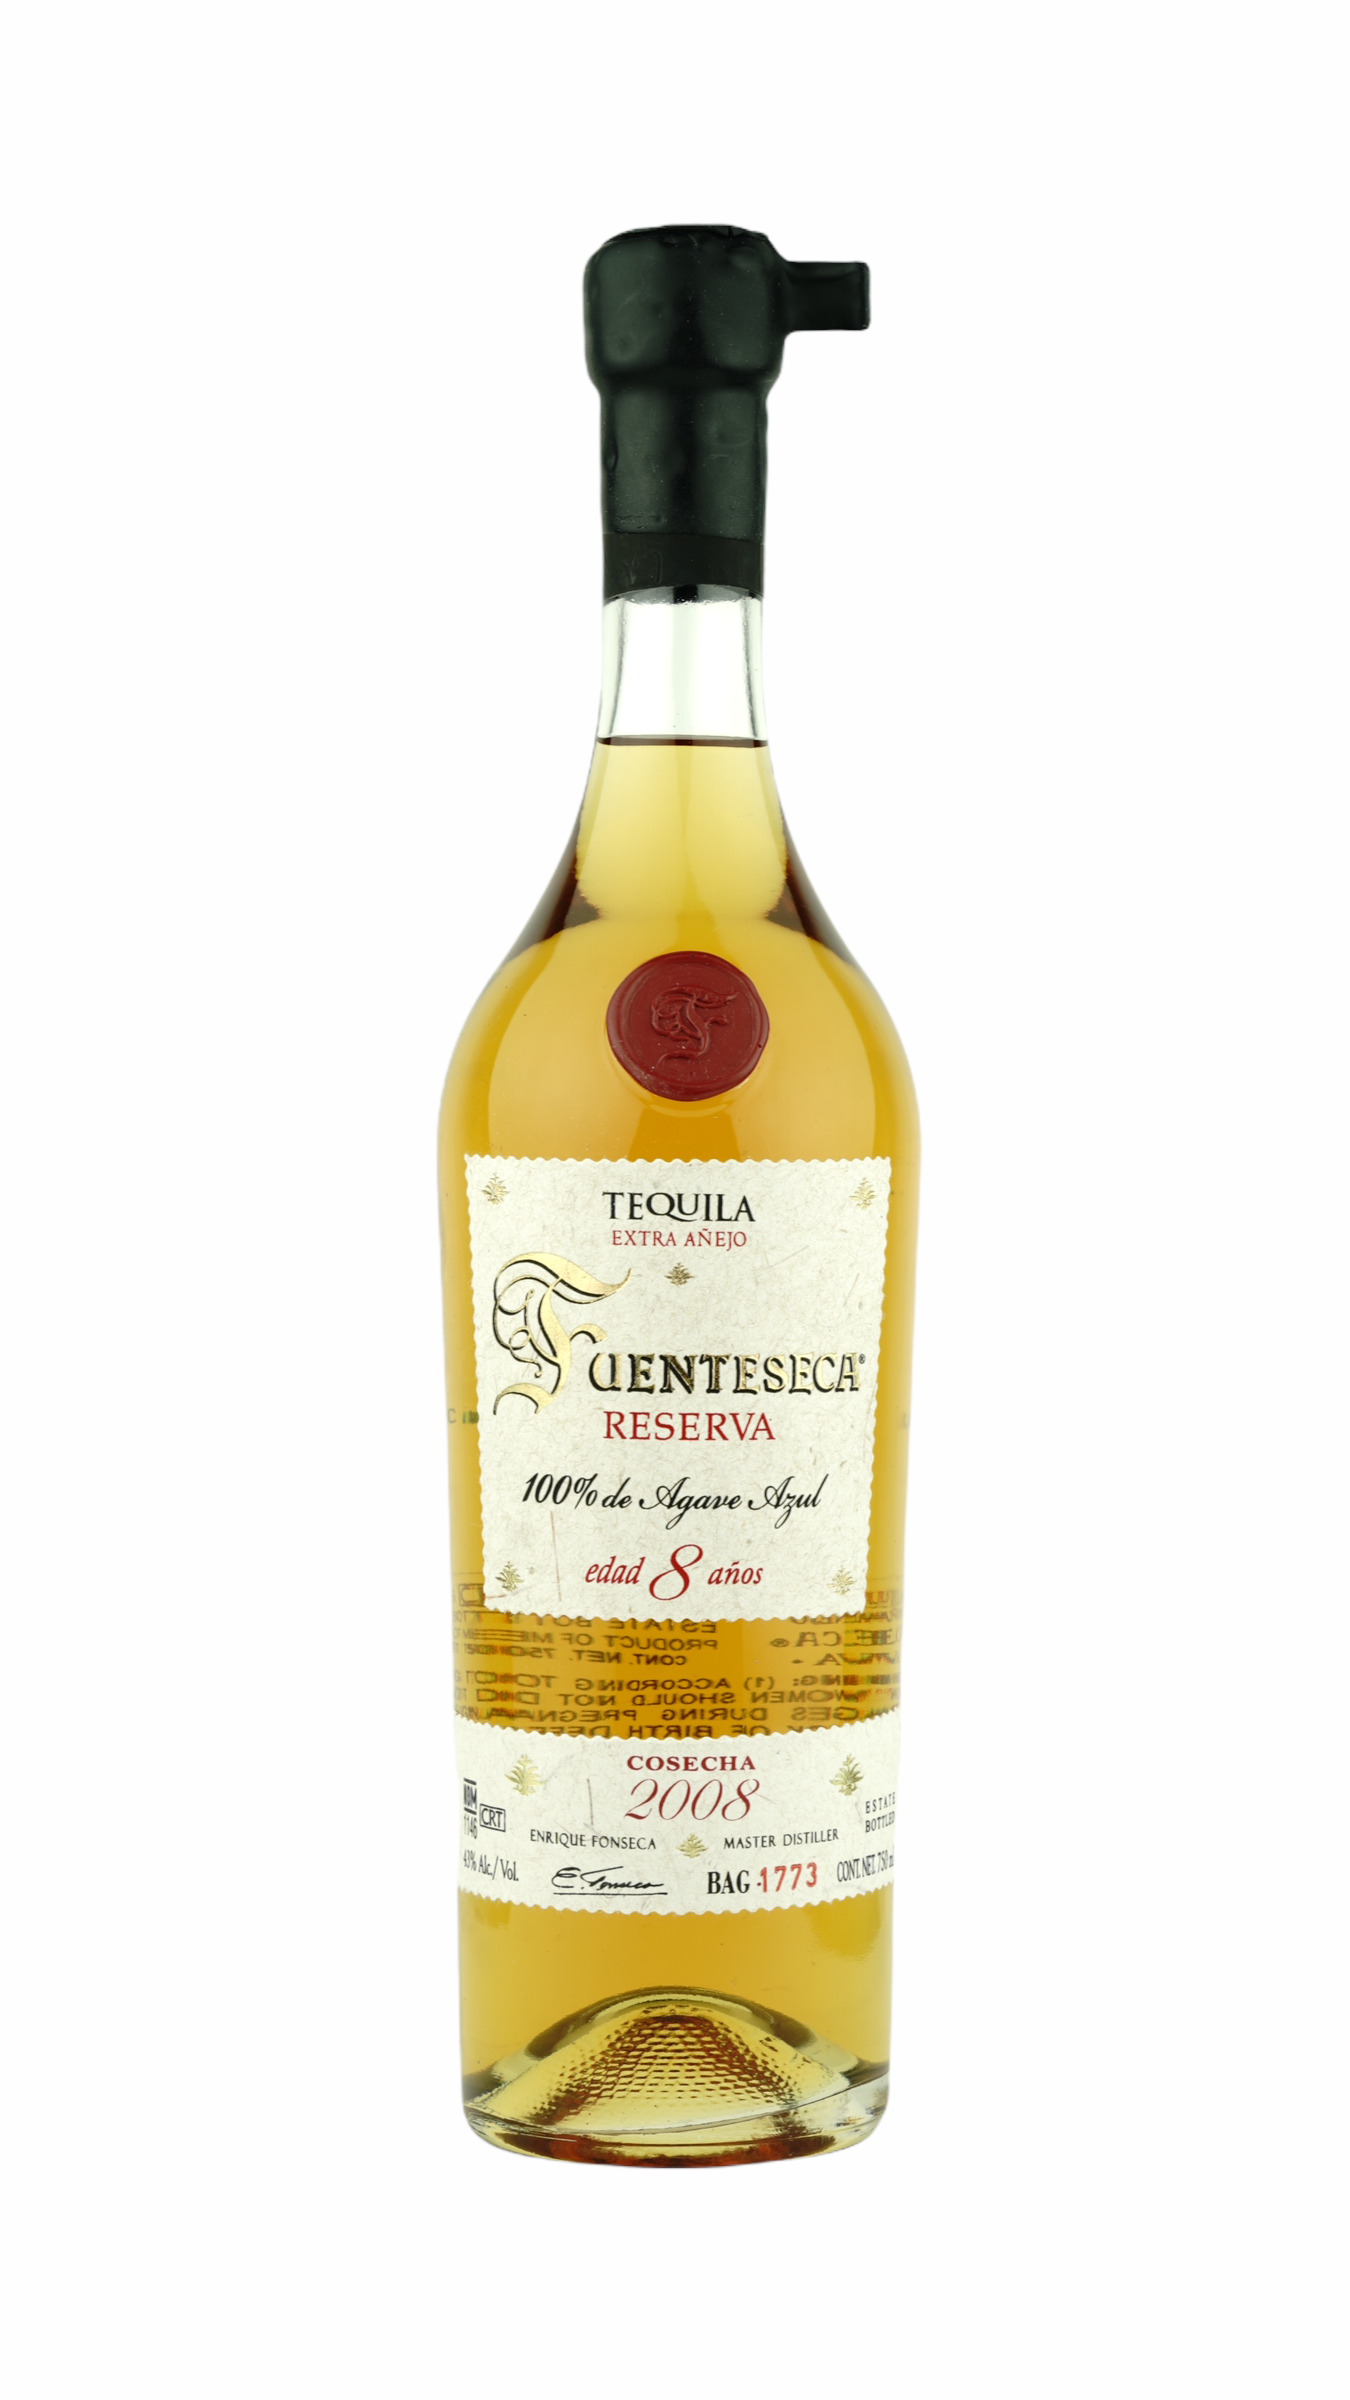 Fuenteseca - "Cosecha 2014 Aged 7 Years" Reserva Extra Anejo Tequila (750ml)